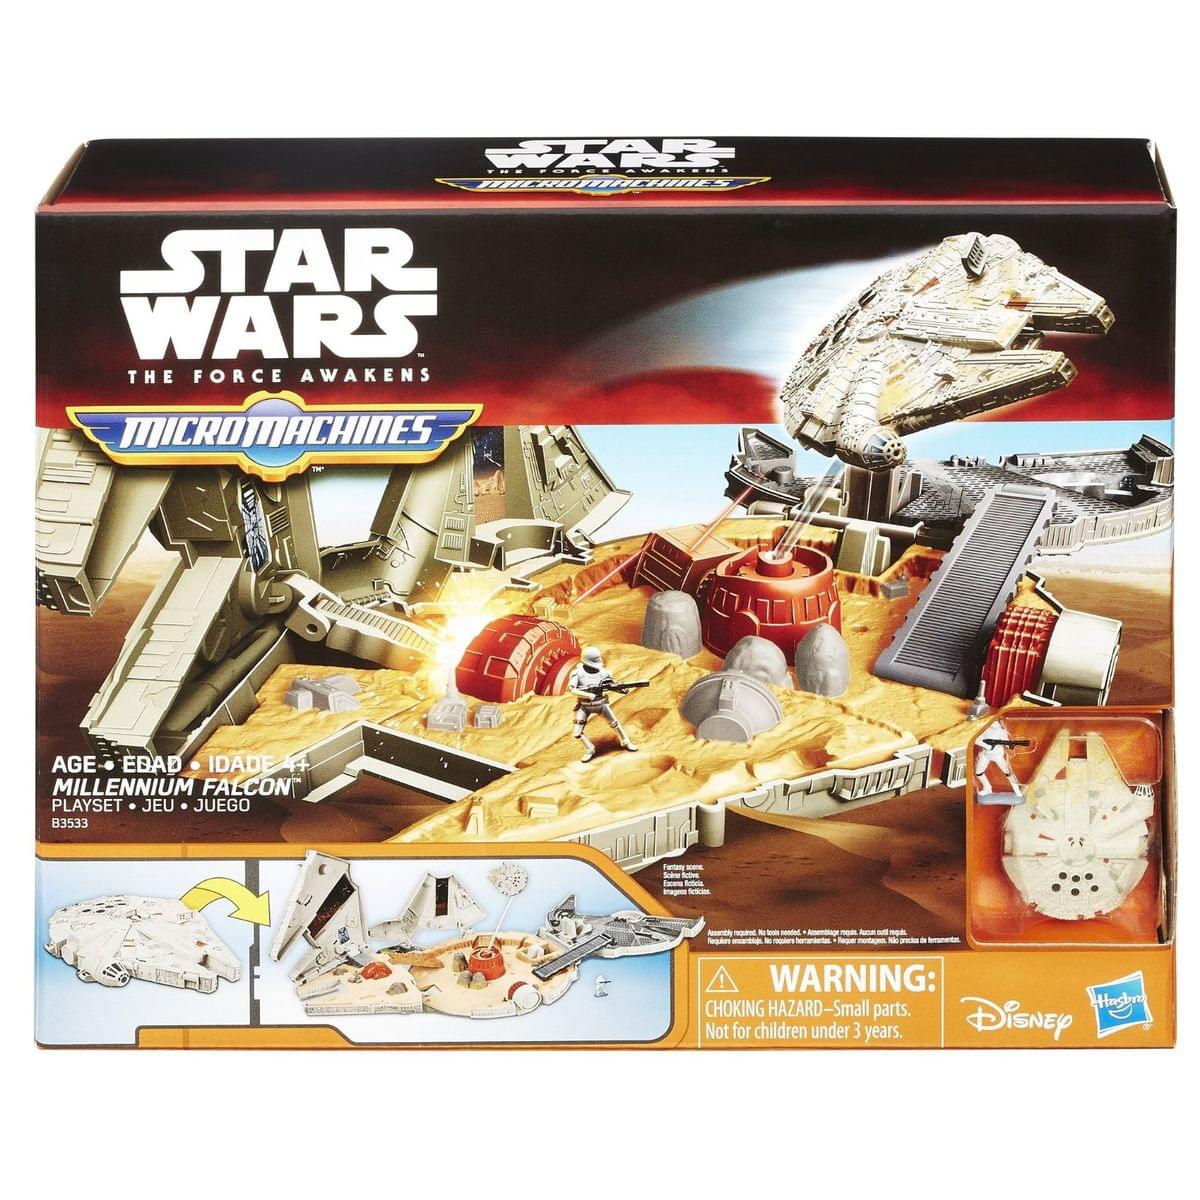 Star Wars The Force Awakens Micro Machines Millennium Falcon Playset - image 3 of 4